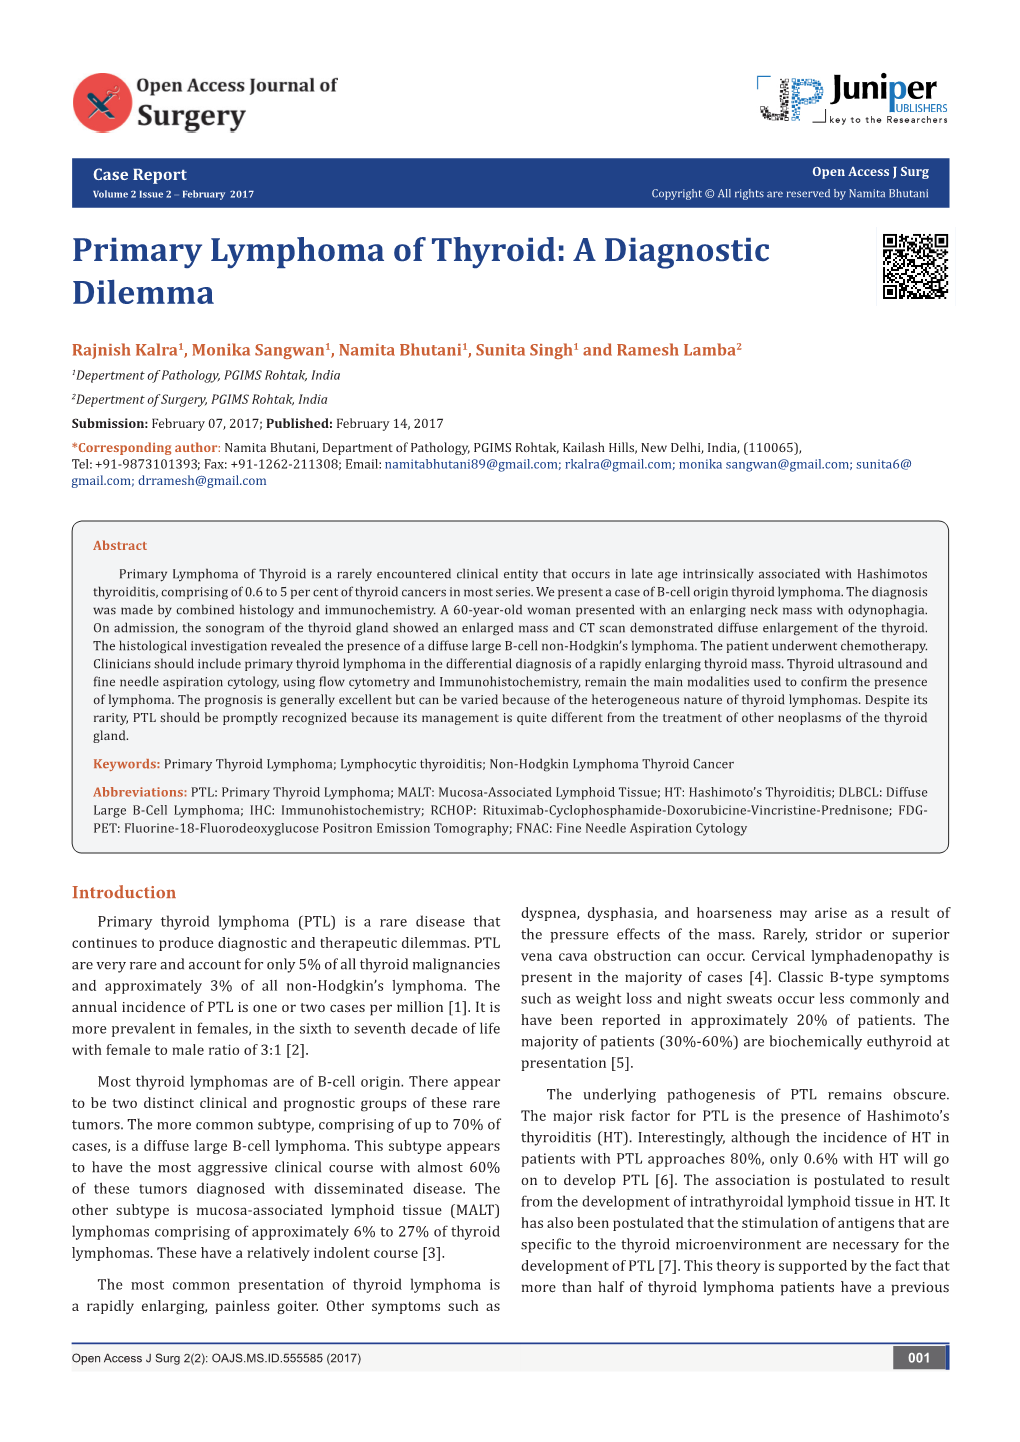 Primary Lymphoma of Thyroid: a Diagnostic Dilemma